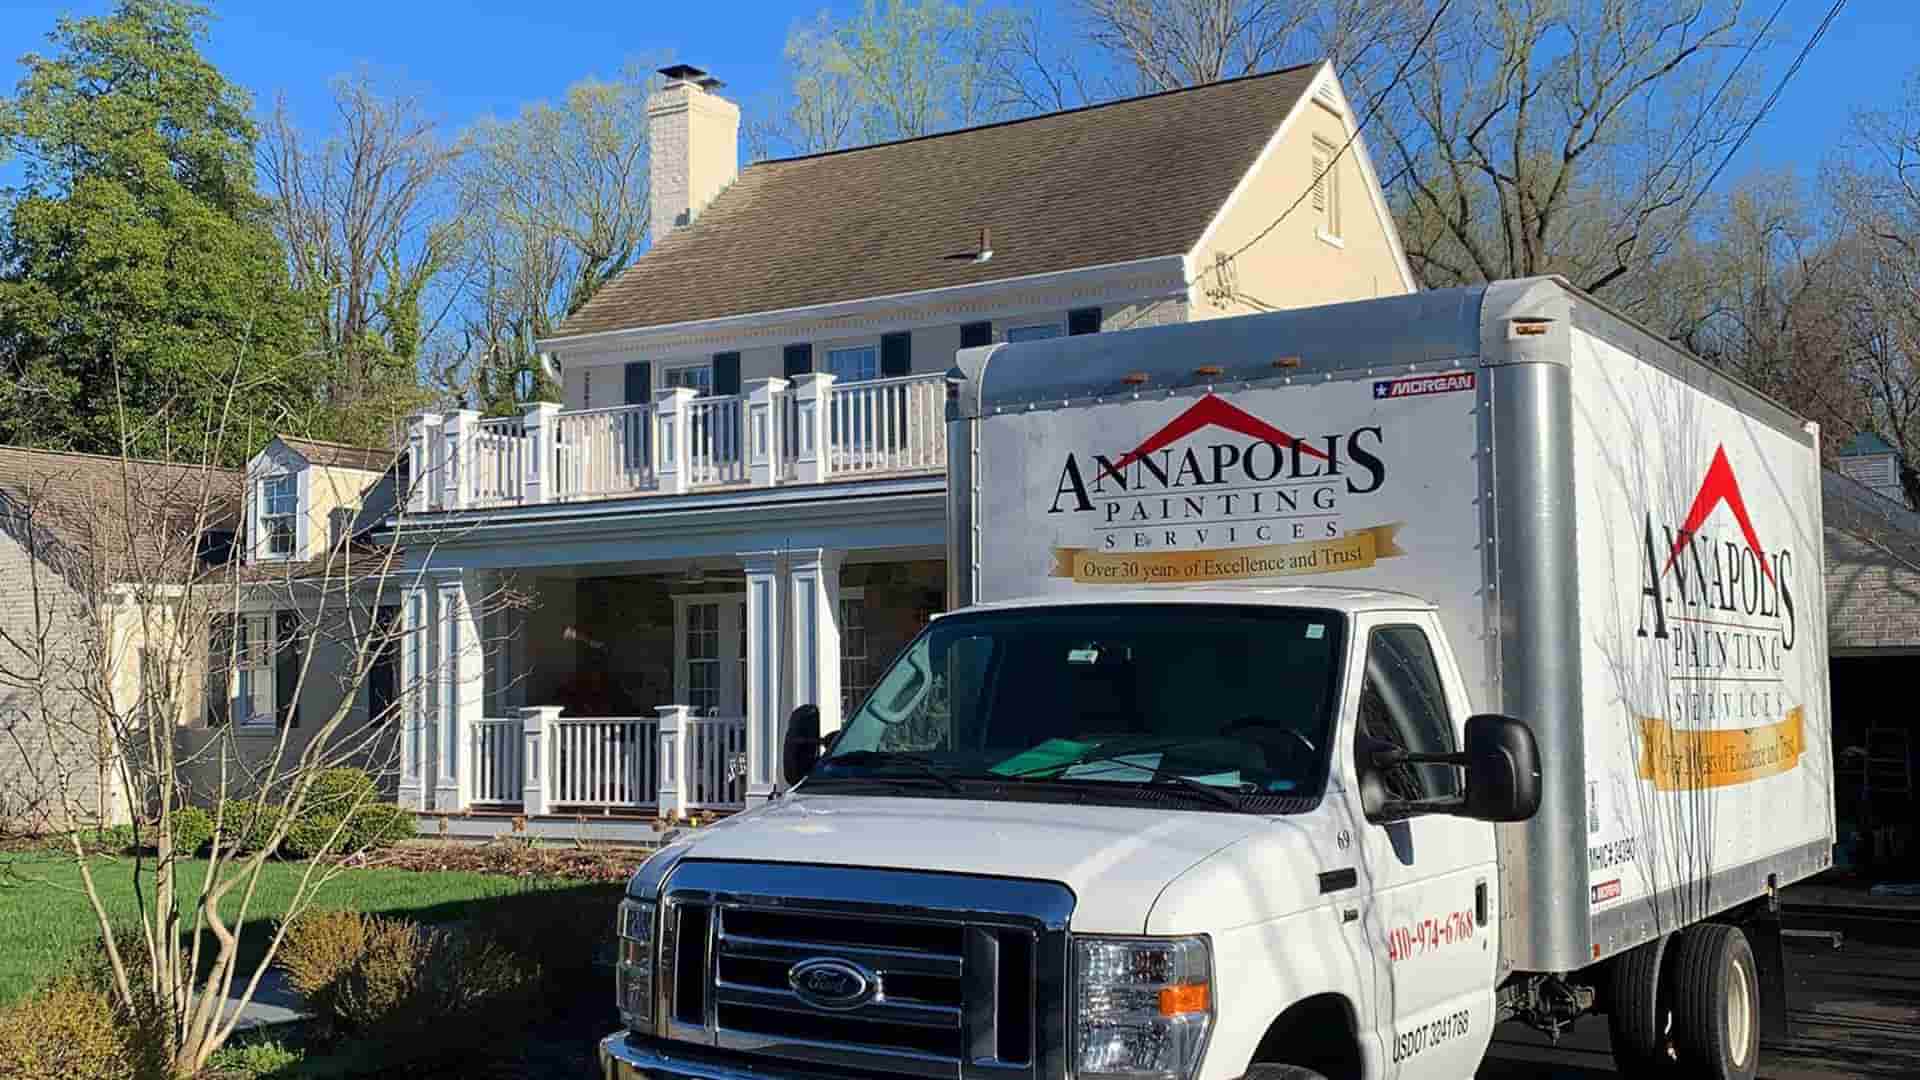 Annapolis Painting Services Crew